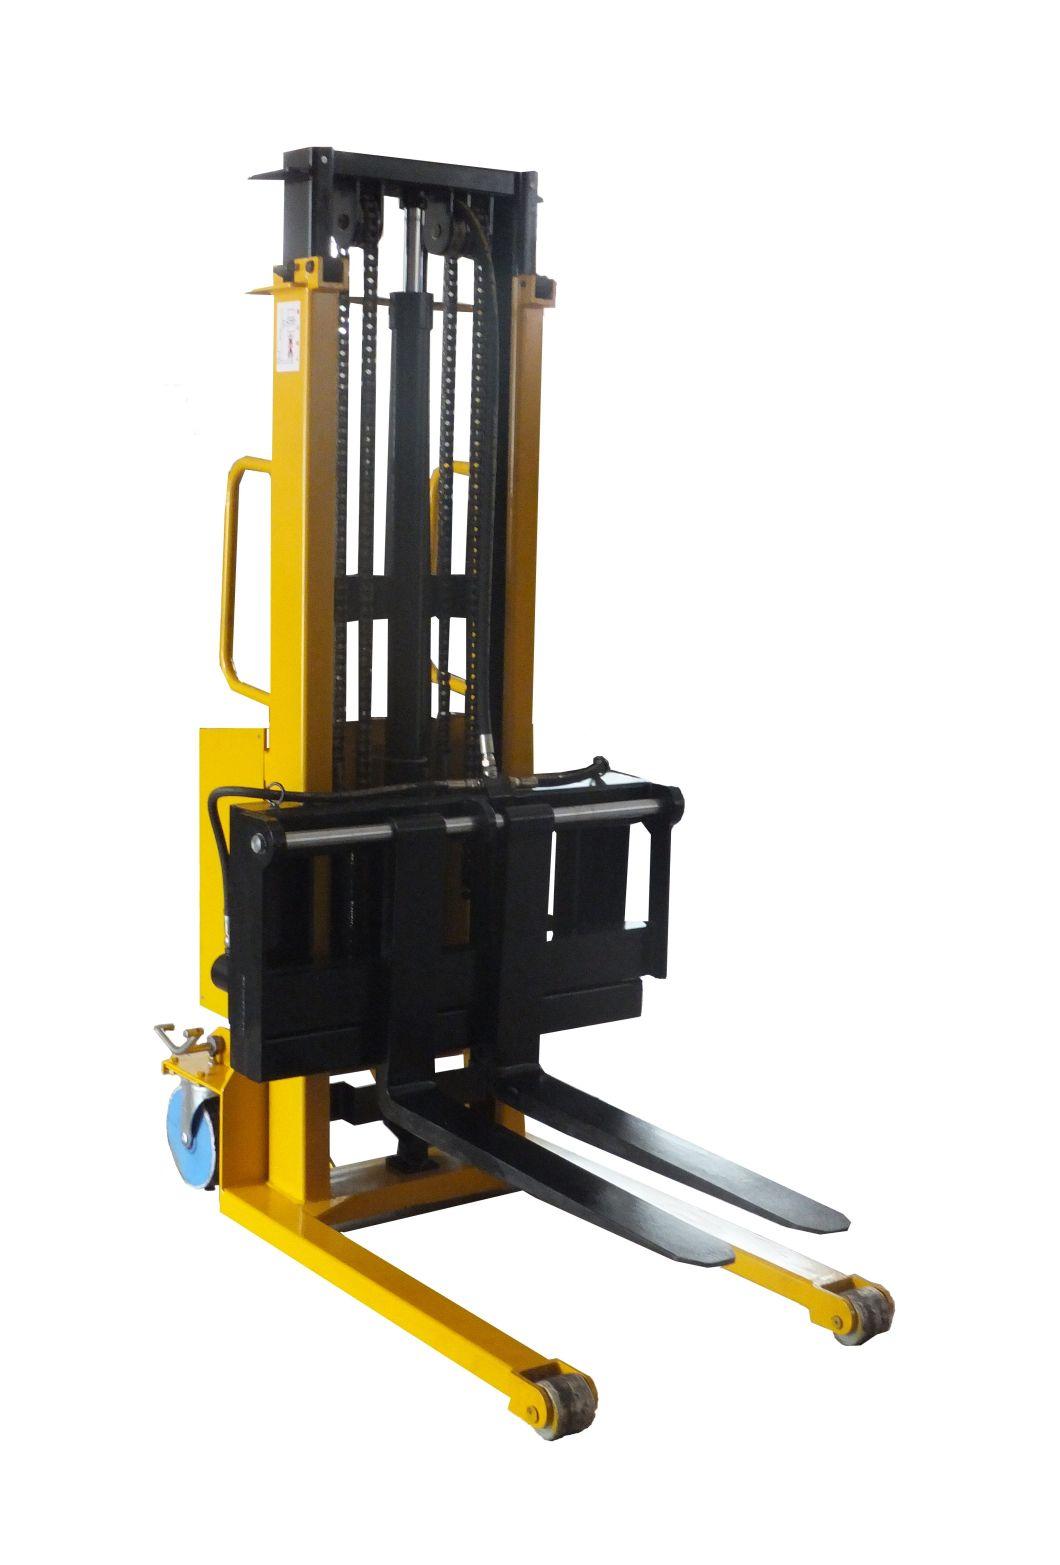 Explosion-Proof Industrial Soap Making Machine Lifting Stacker